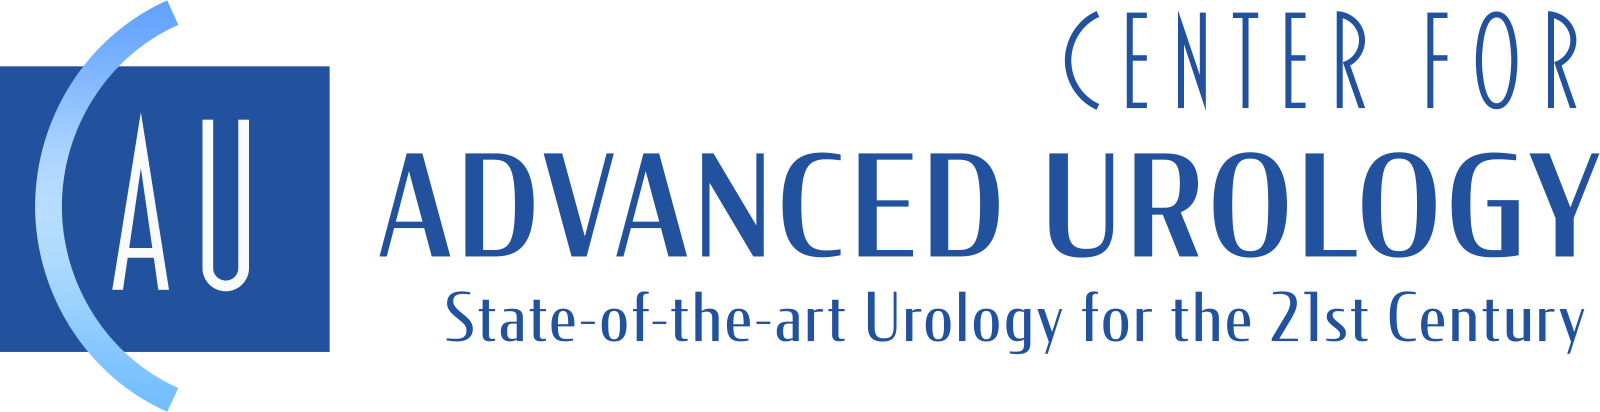 Center for Advanced Urology - State-of-the-art Urology for the 21st Century